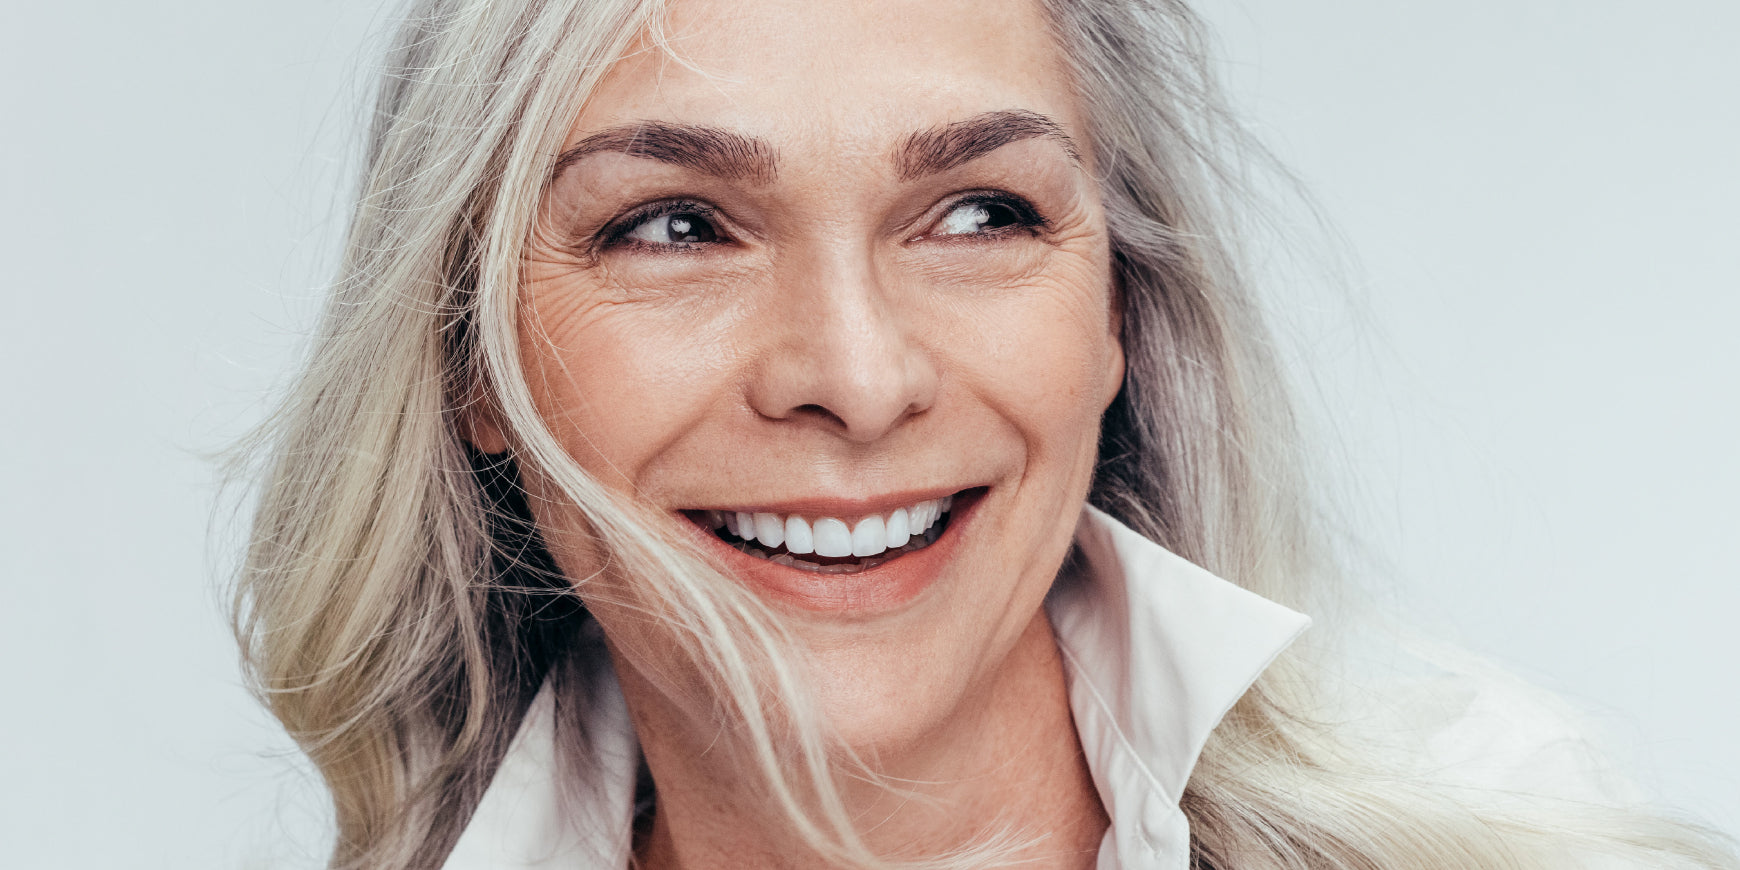 Mature woman smiling with teeth